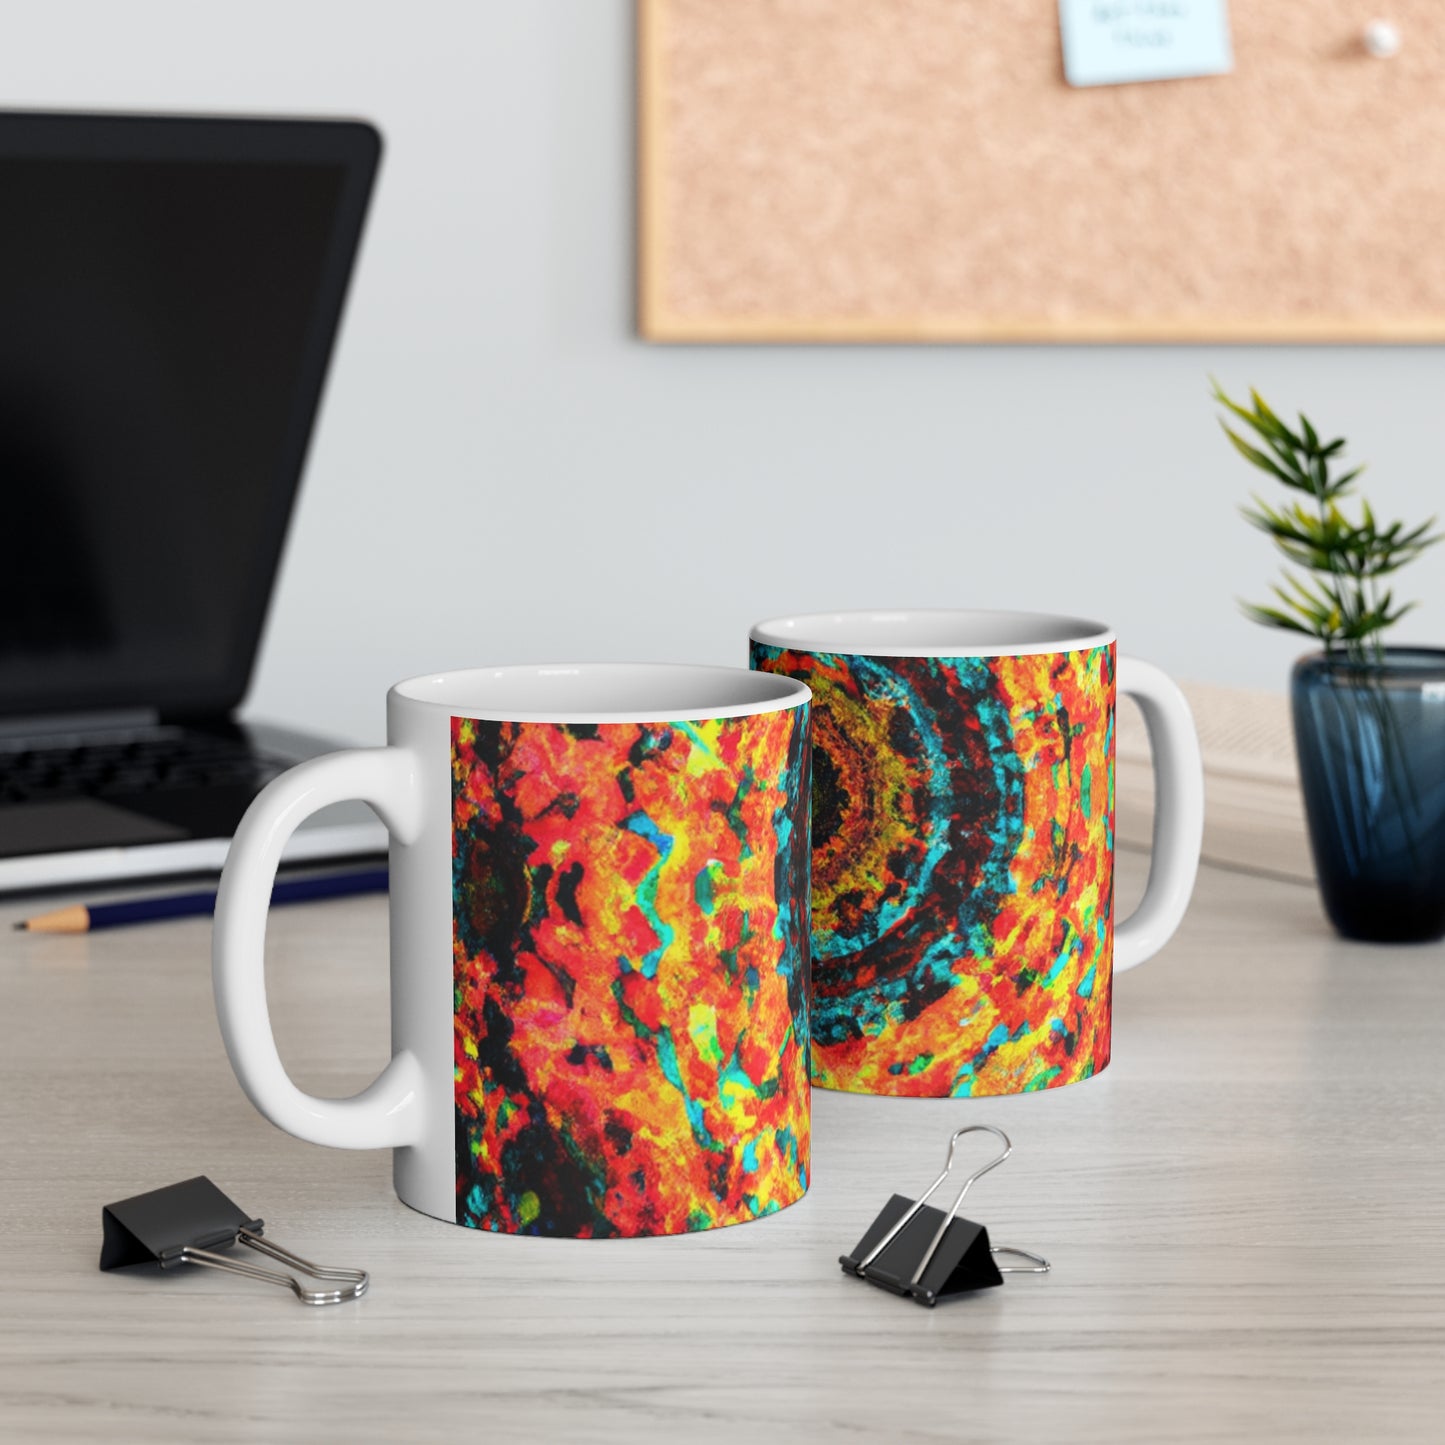 Aurora's Coffee Roasters - Psychedelic Coffee Cup Mug 11 Ounce